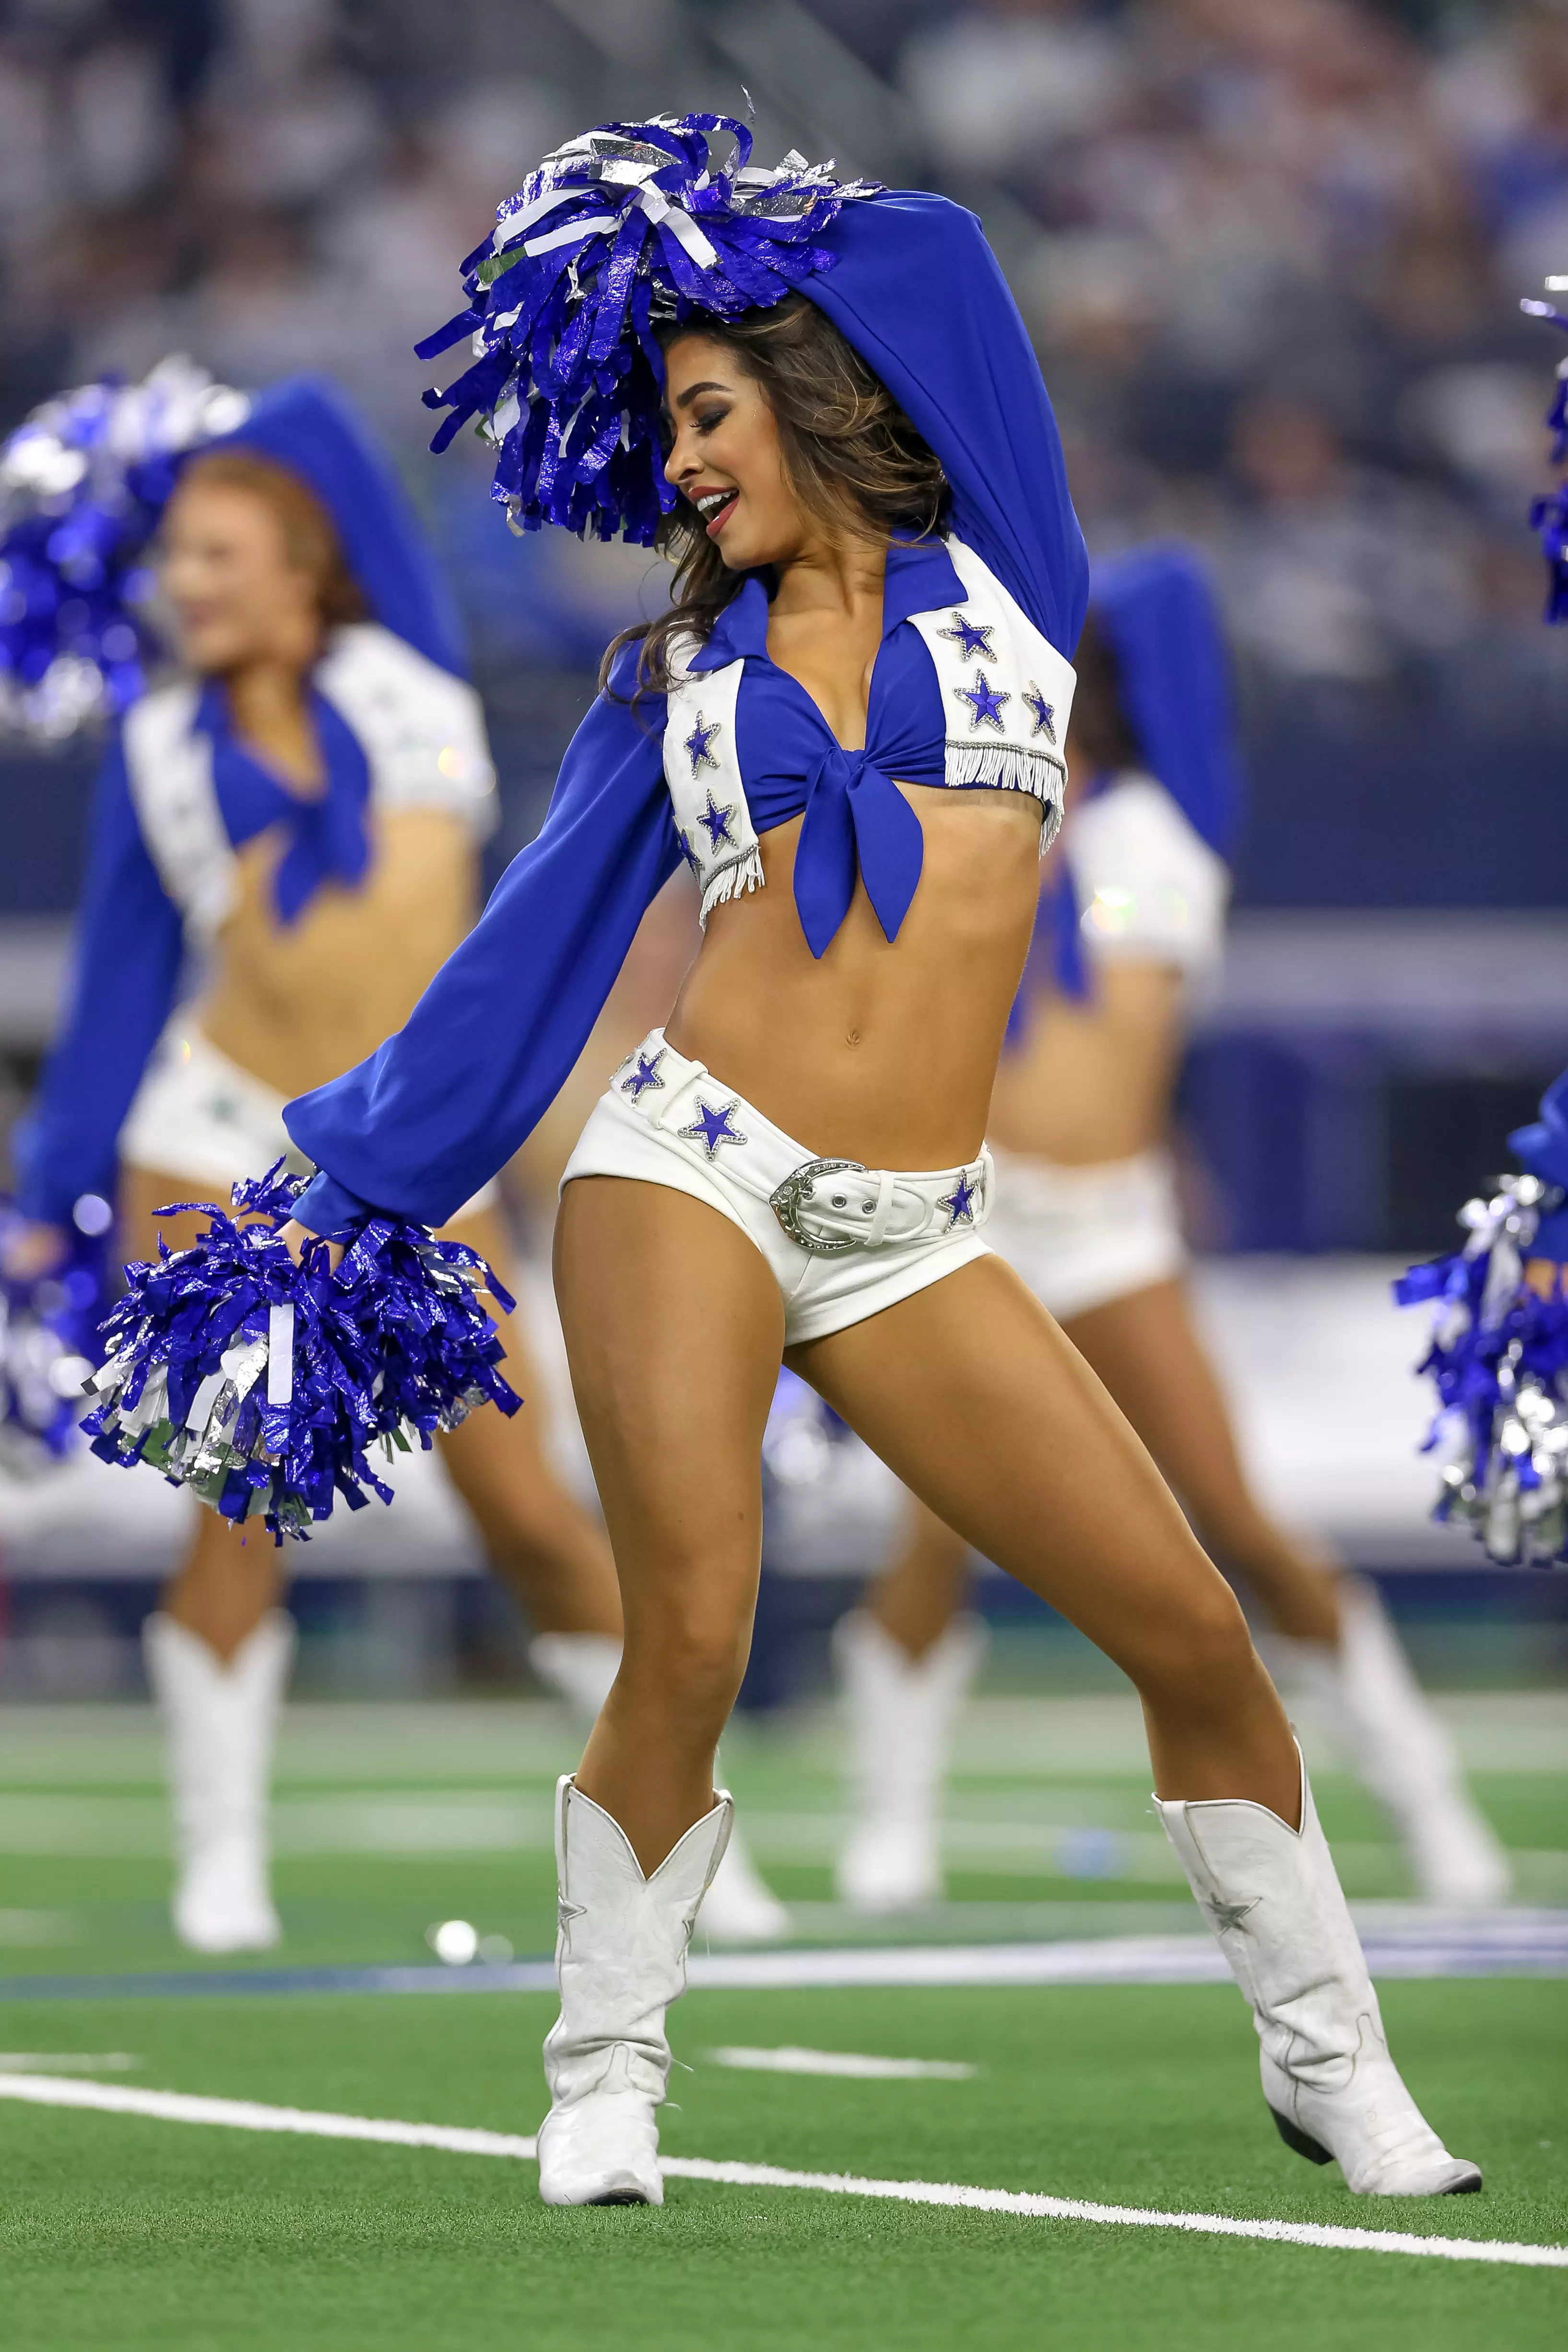 Dallas Cowboys cheerleaders have their own reality TV show